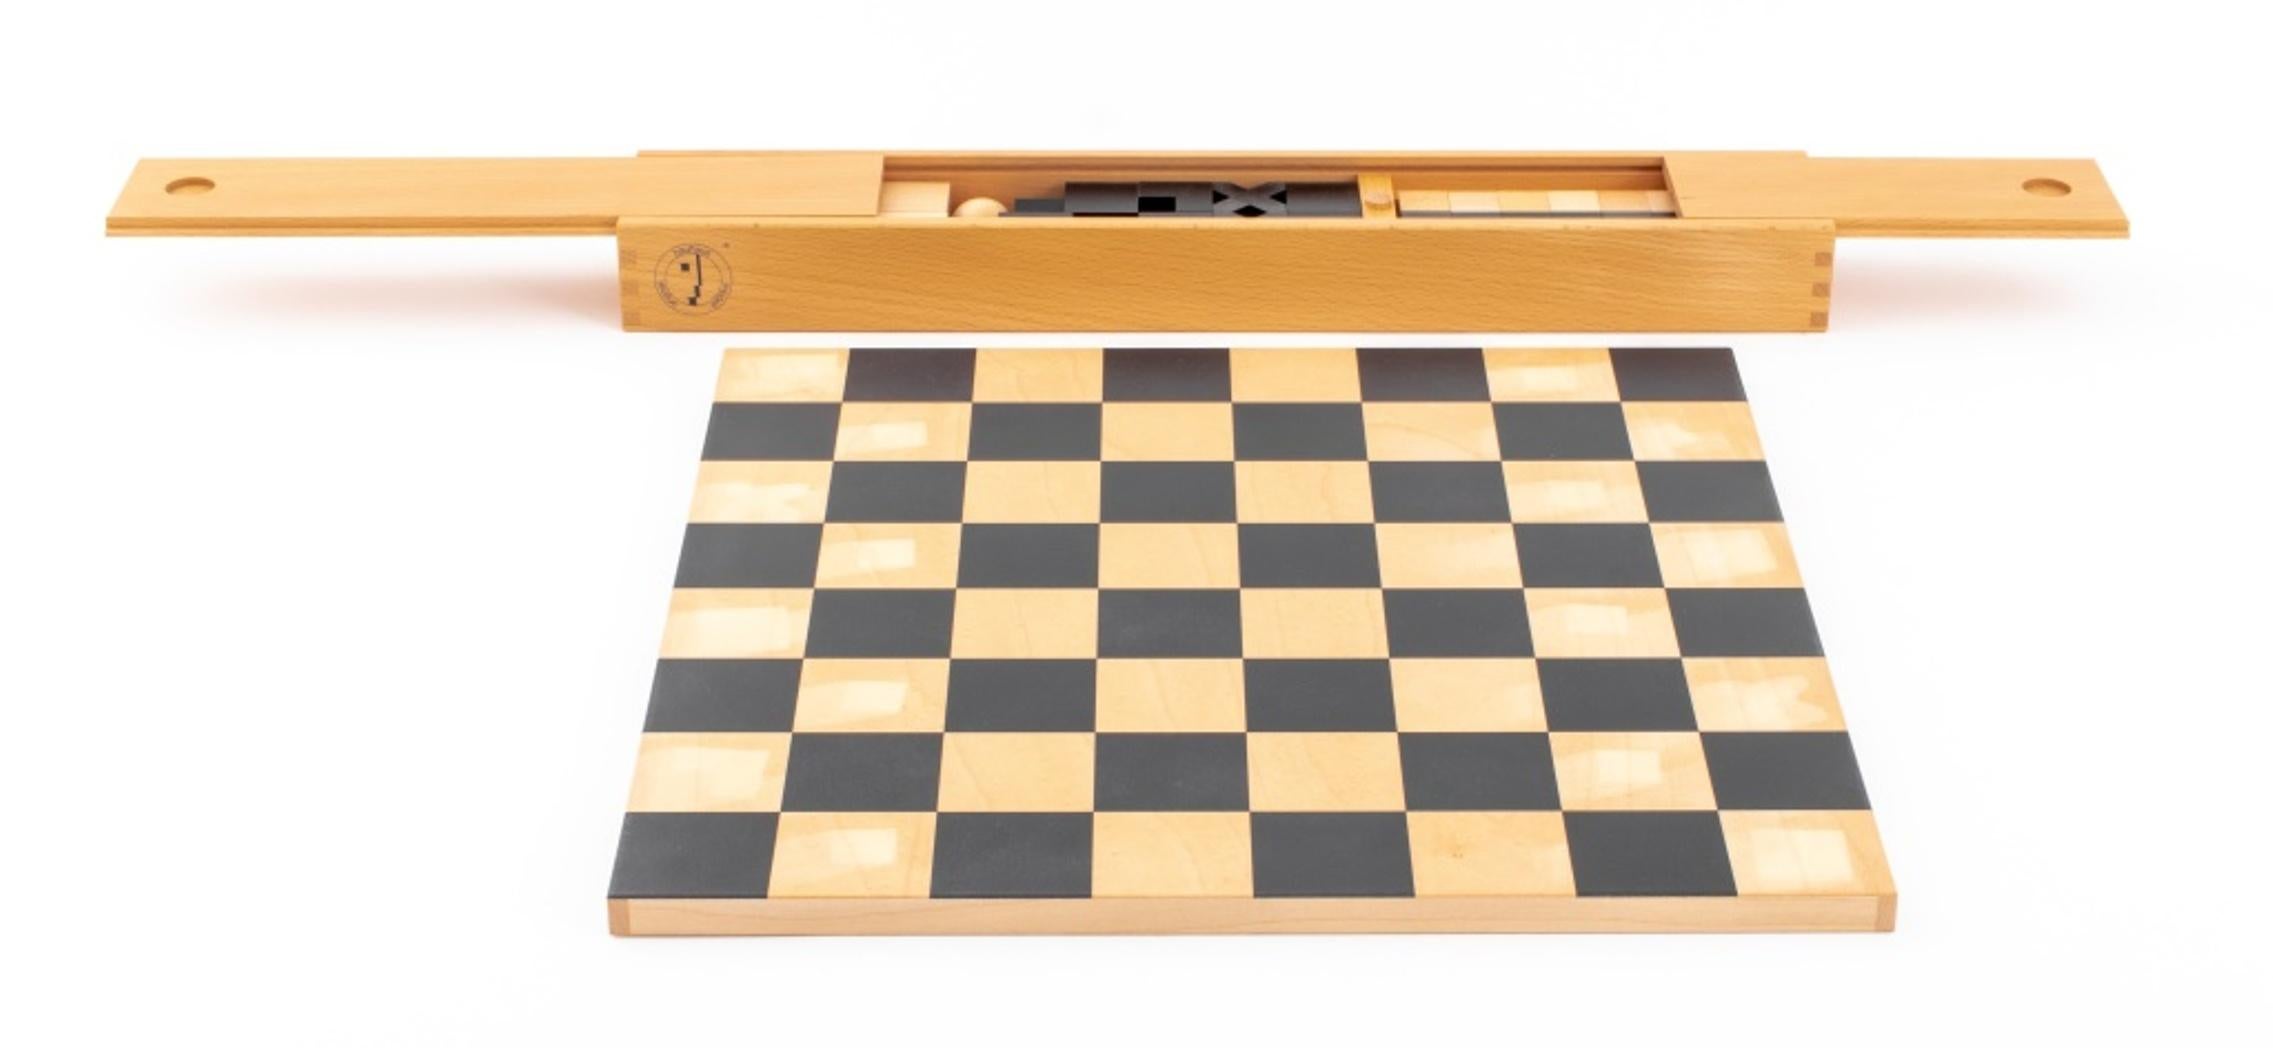 Bauhaus hardwood chess set and board, the Bauhaus-Schachspiel originally designed by Josef Hartwig (German, 1880-1956) in 1923, the geometric pieces housed in a box marked 